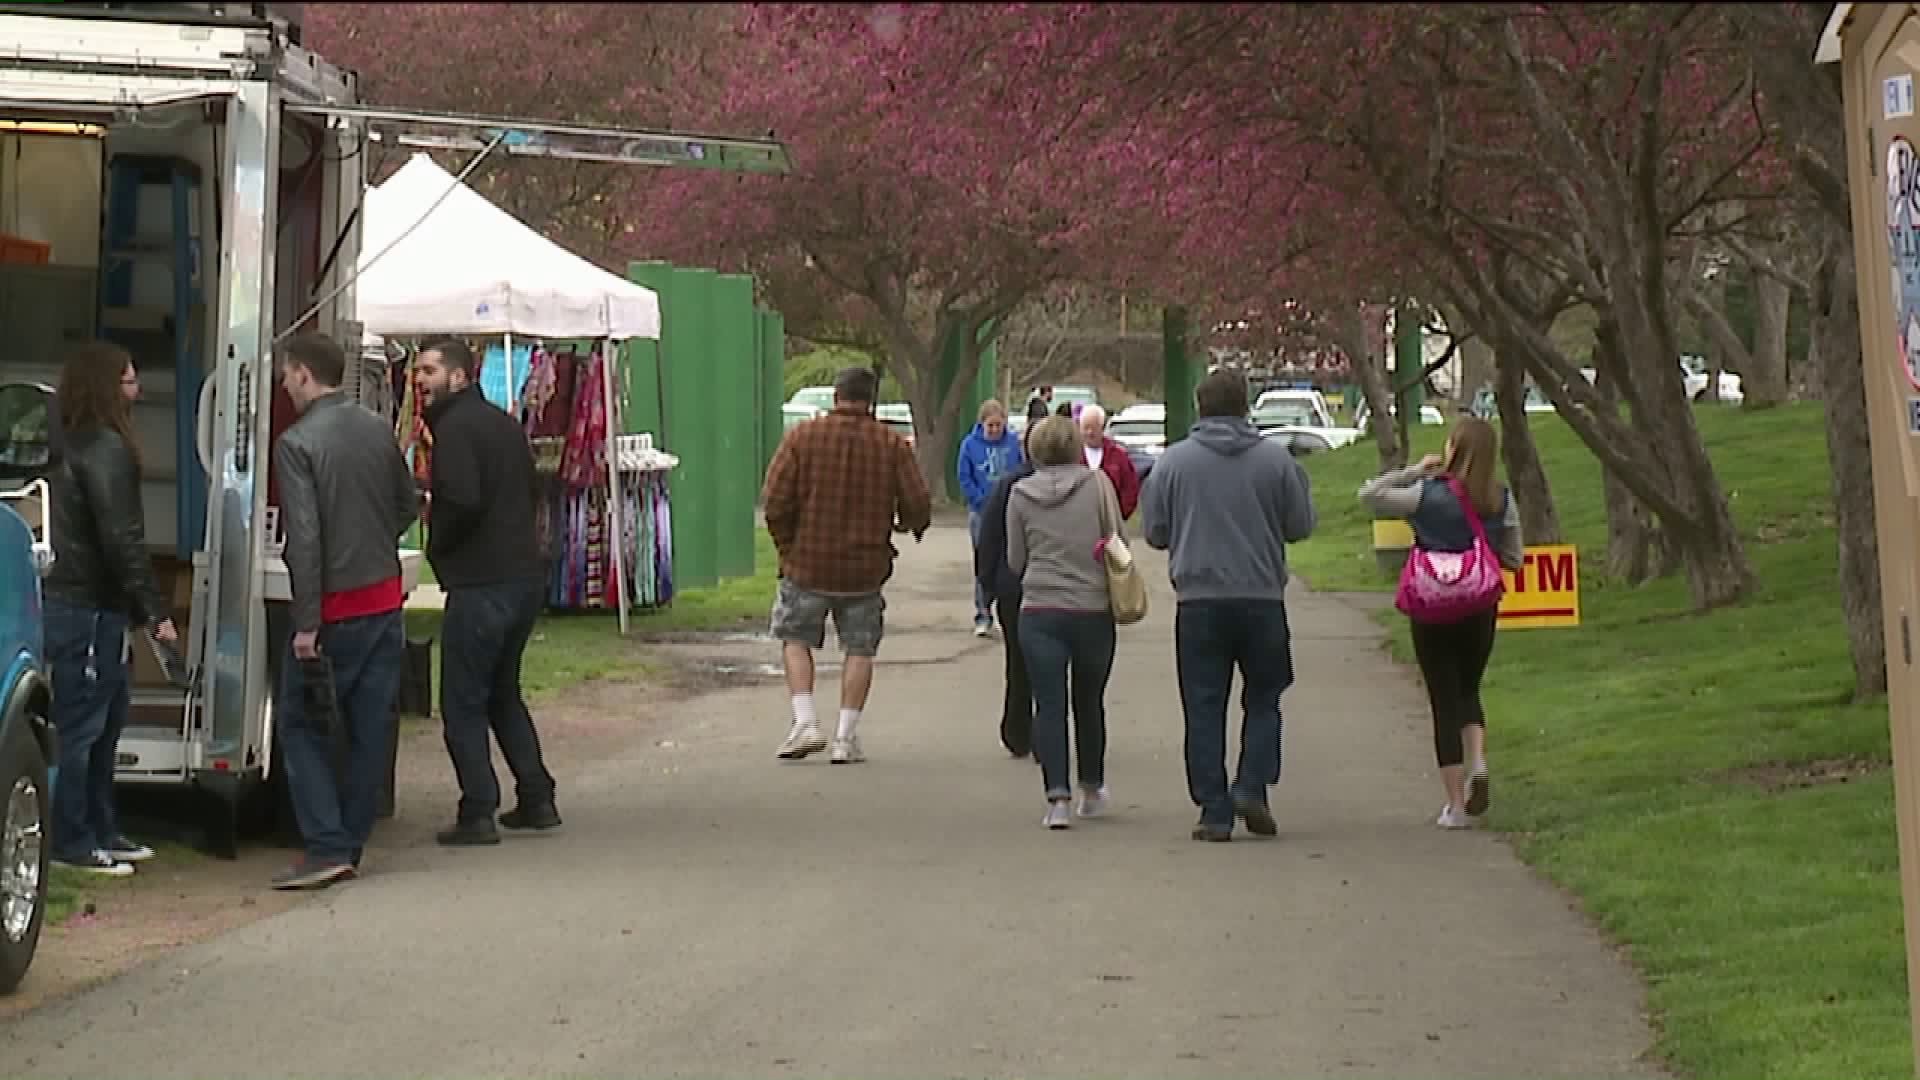 40th Year for Cherry Blossom Festival in WilkesBarre